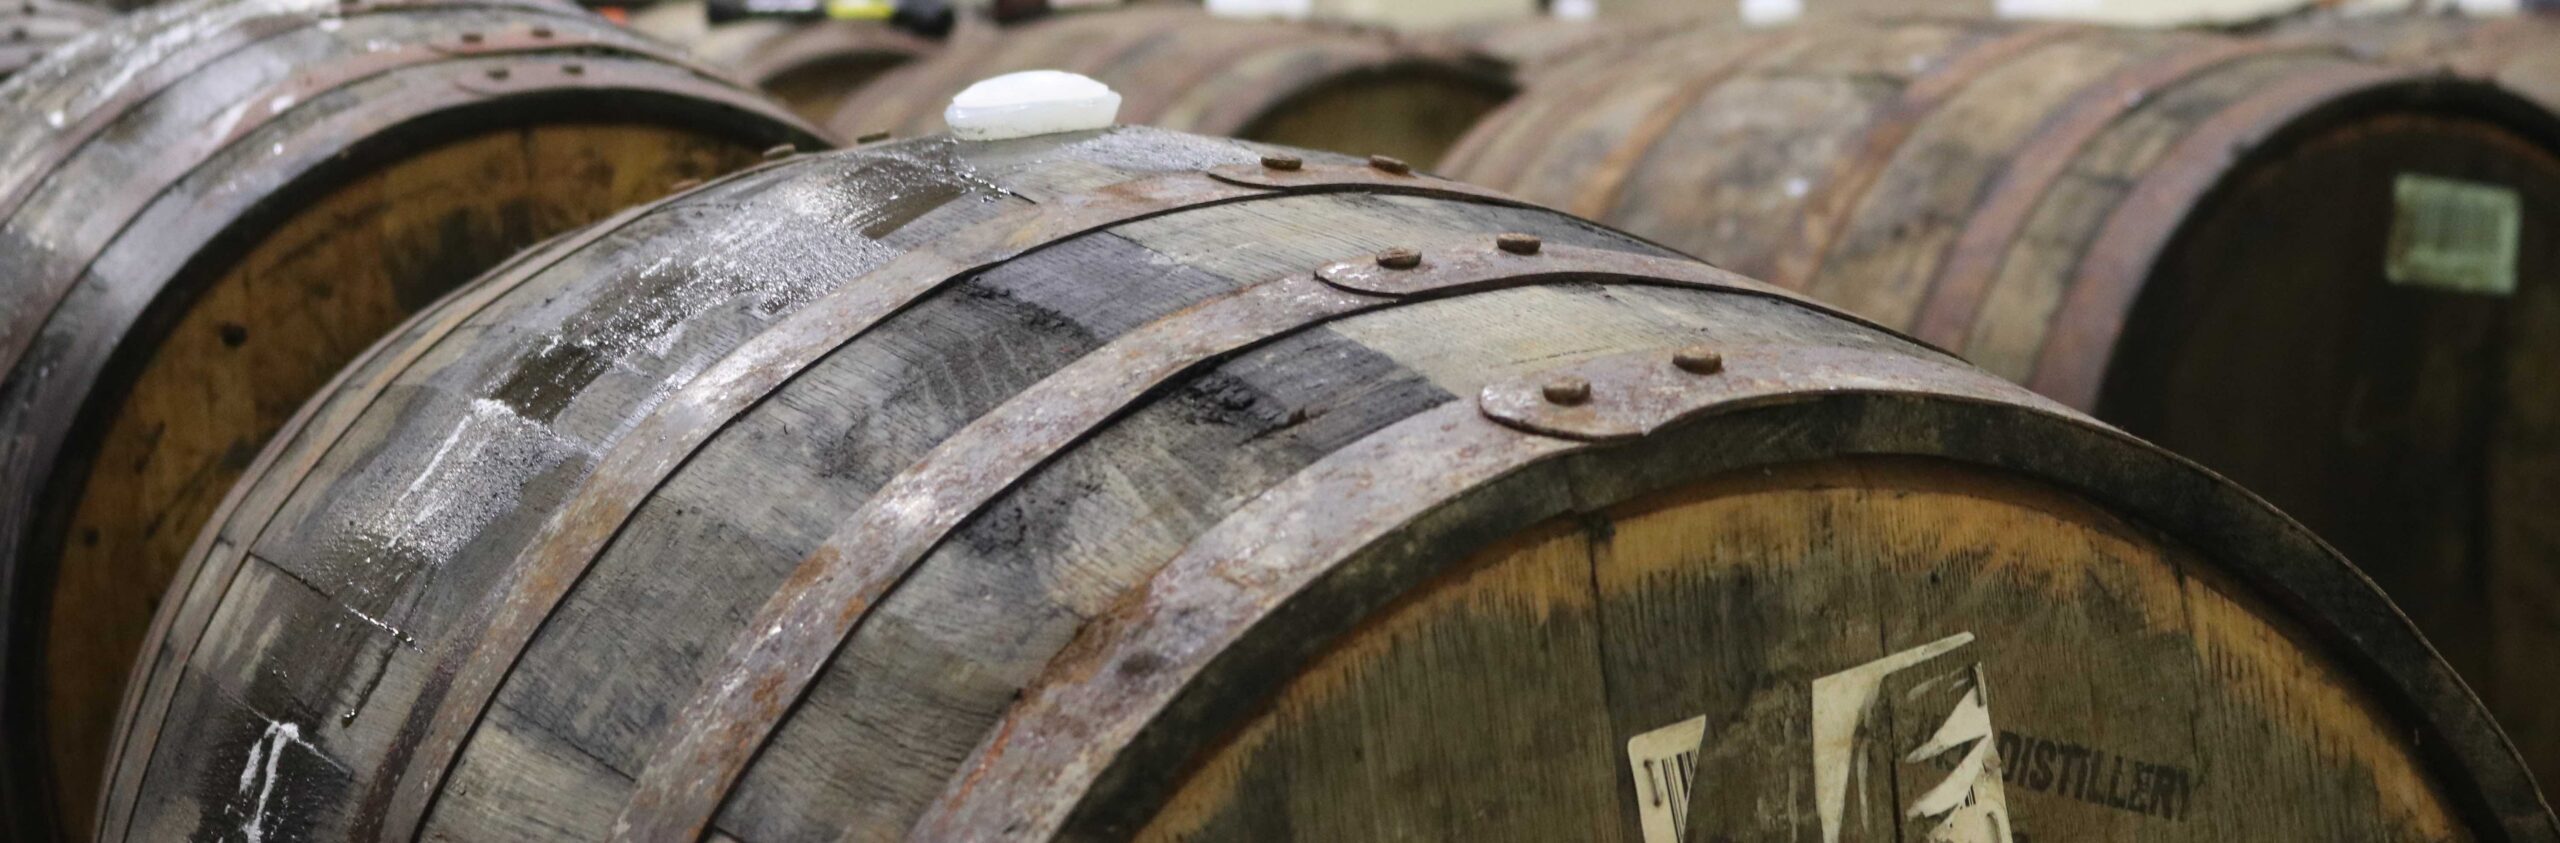 U.S. Whiskey Exports Remain Strong as Ag Exports are Expected to Decline Overall